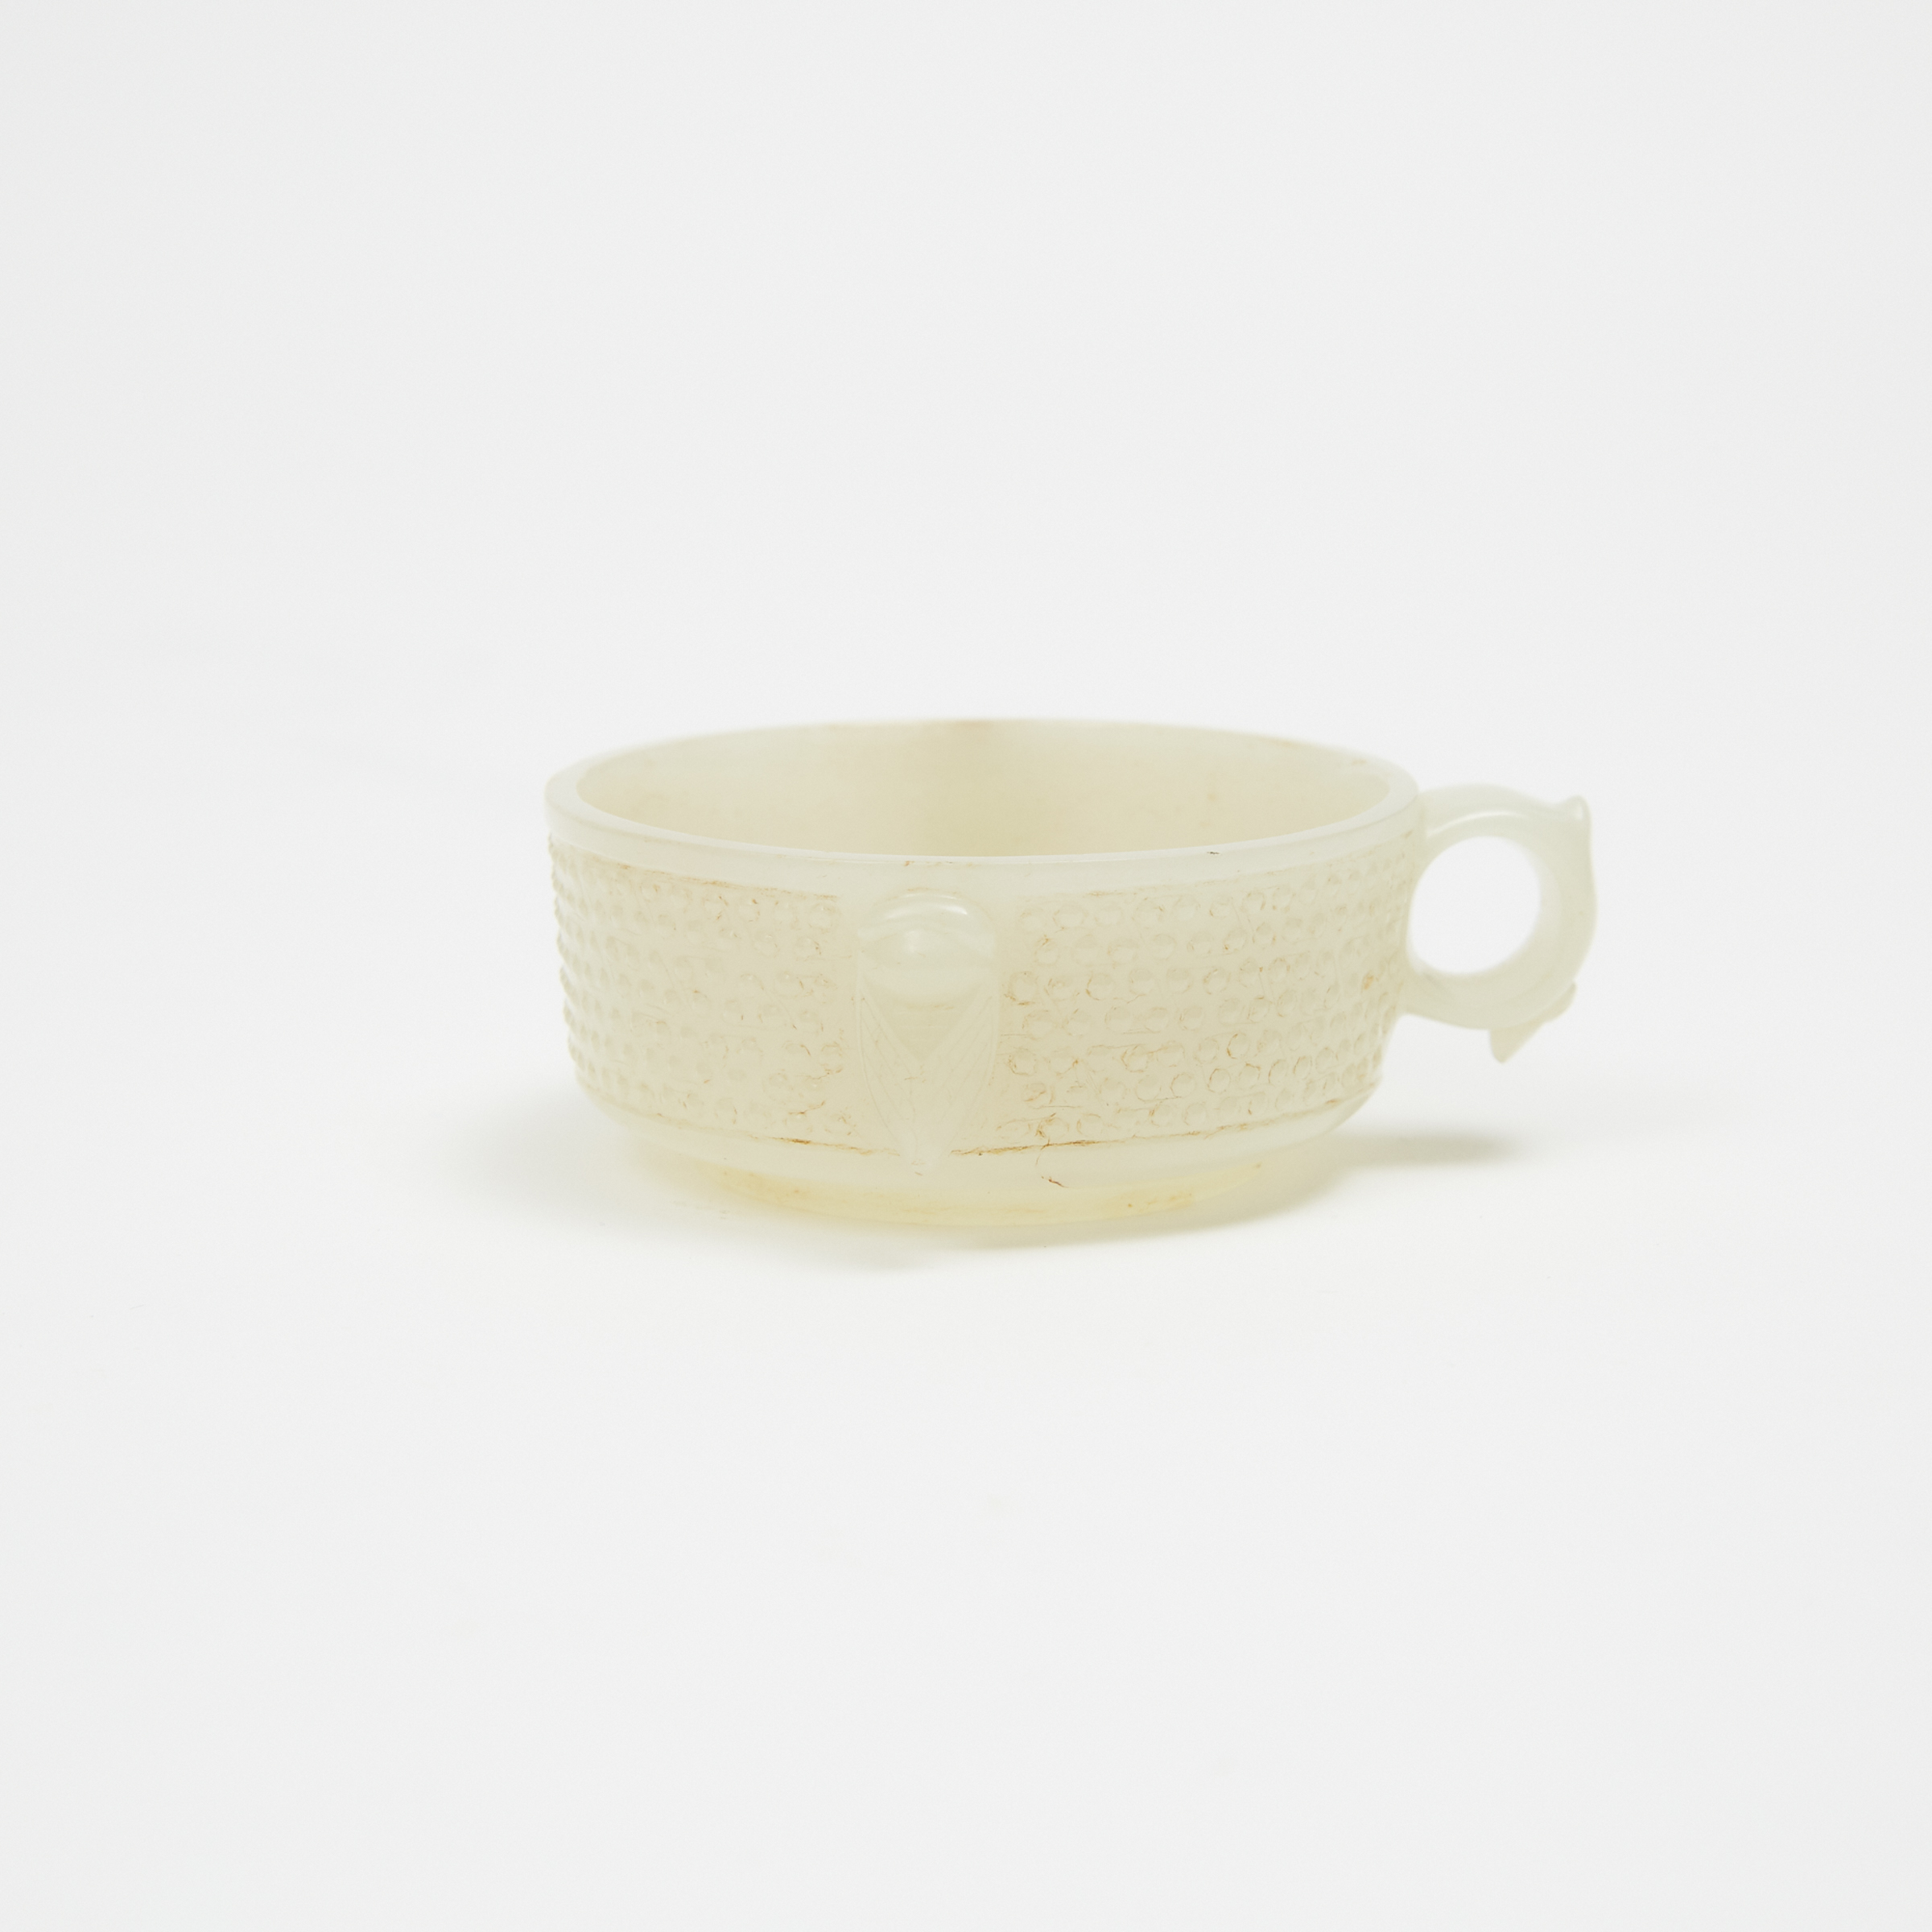 An Archaic Style White Jade Cup, Early 20th Century